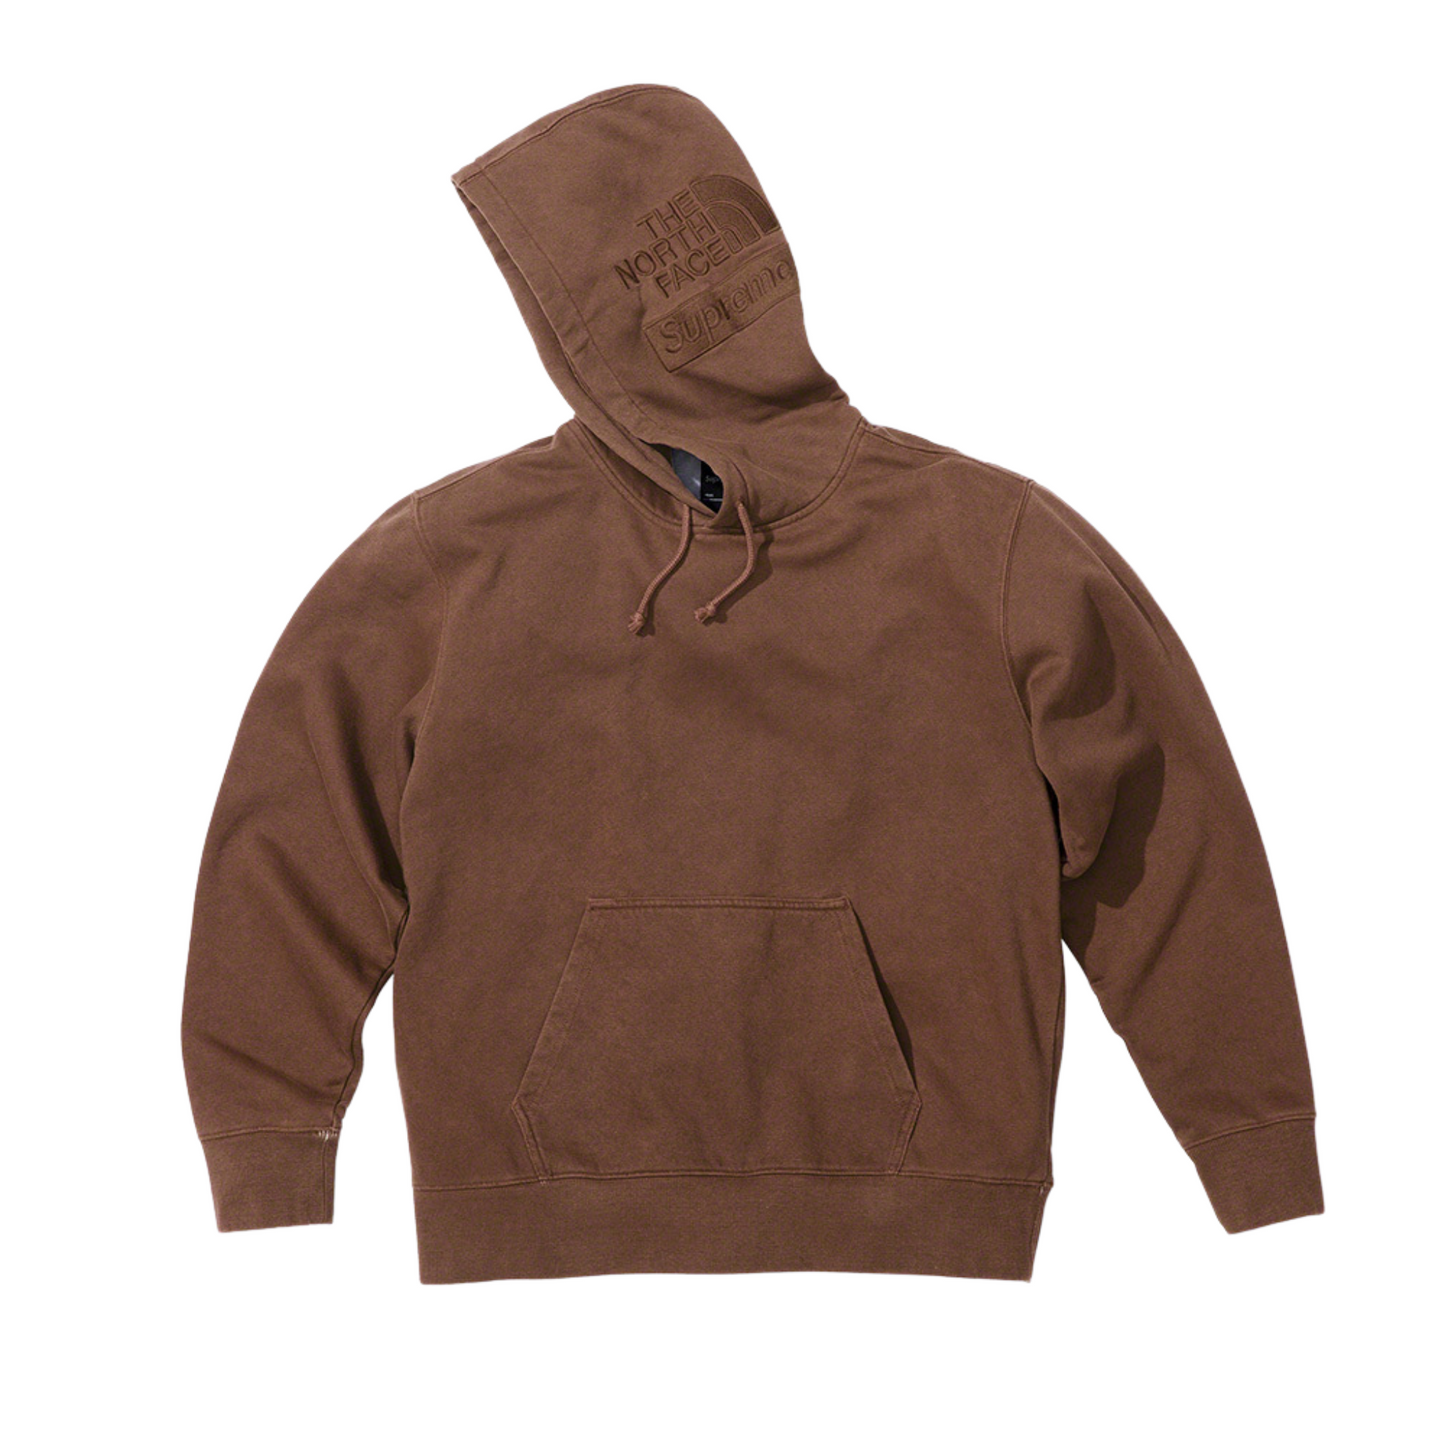 Supreme/The North Face Pigment Printed Hooded Sweatshirt – The